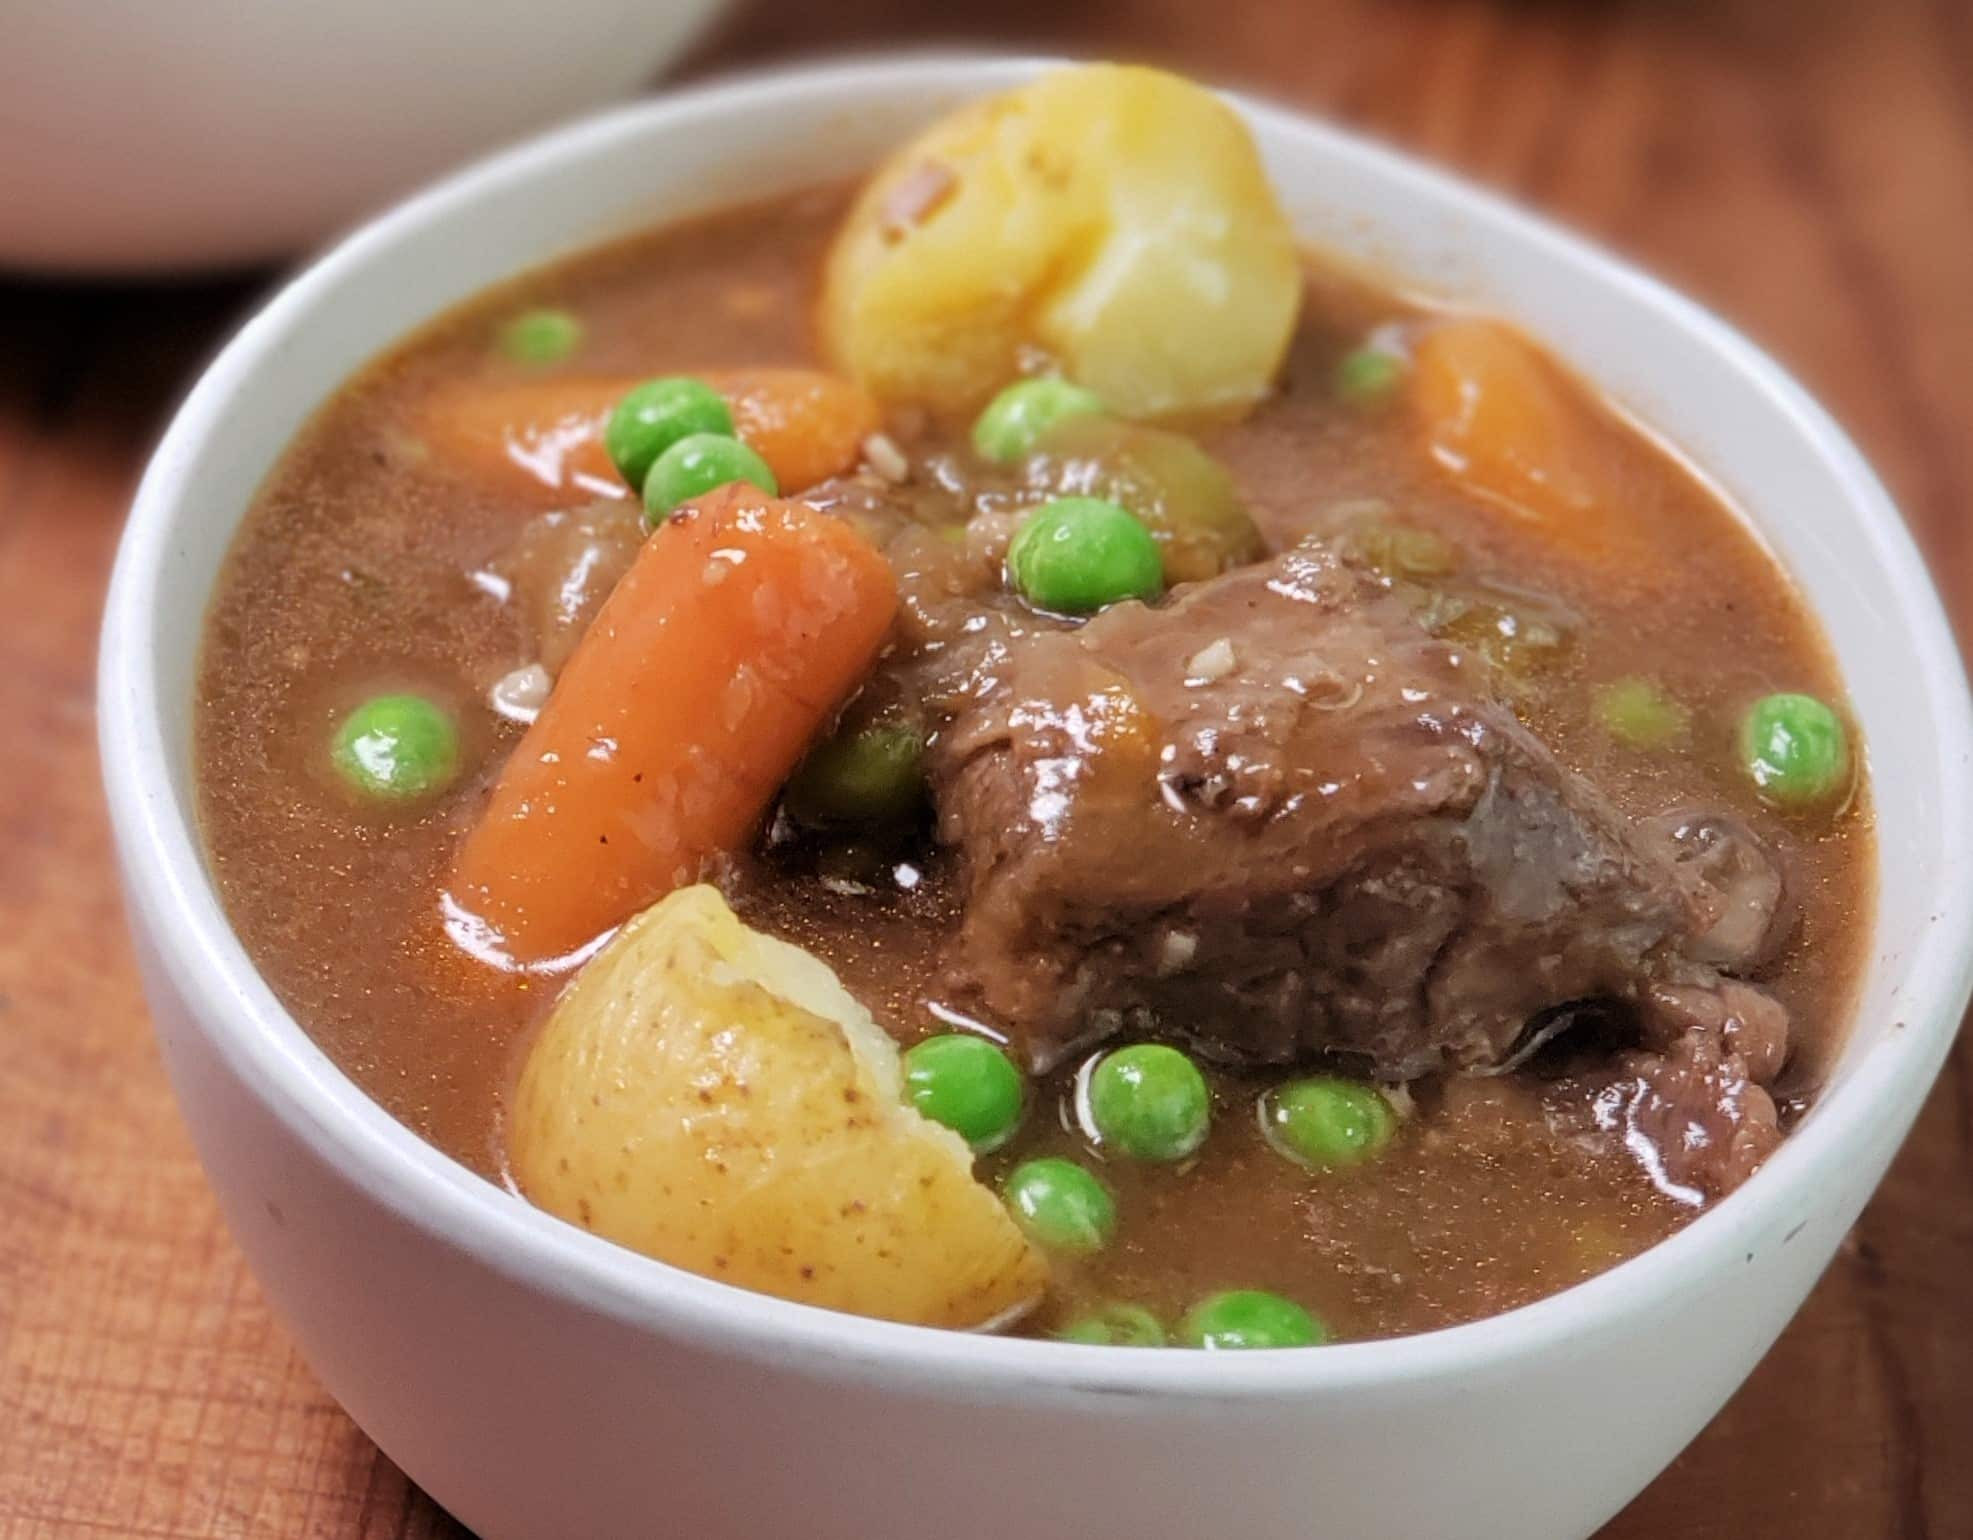 Instant Pot Beef Stew This Old Gal Awesome Instant Pot Beef Stew with Apple Dumplings